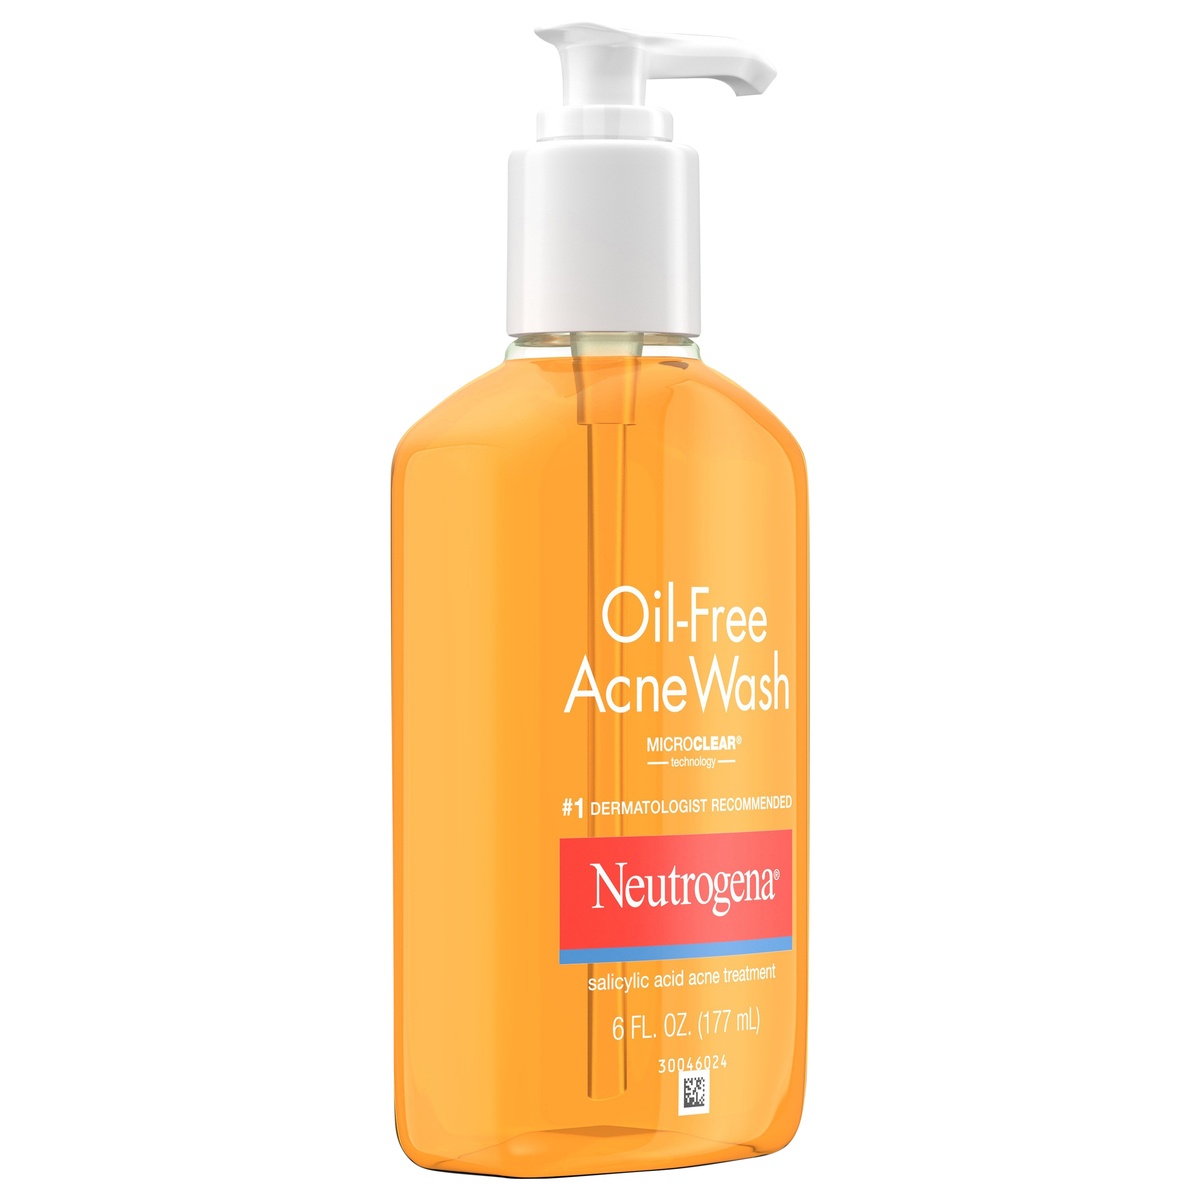 slide 2 of 8, Neutrogena Oil-Free Acne Fighting Facial Cleanser, 2% Salicylic Acid Acne Treatment, Daily Oil-Free Acne Face Wash for Acne-Prone Skin with Salicylic Acid Acne Medicine, 6 oz